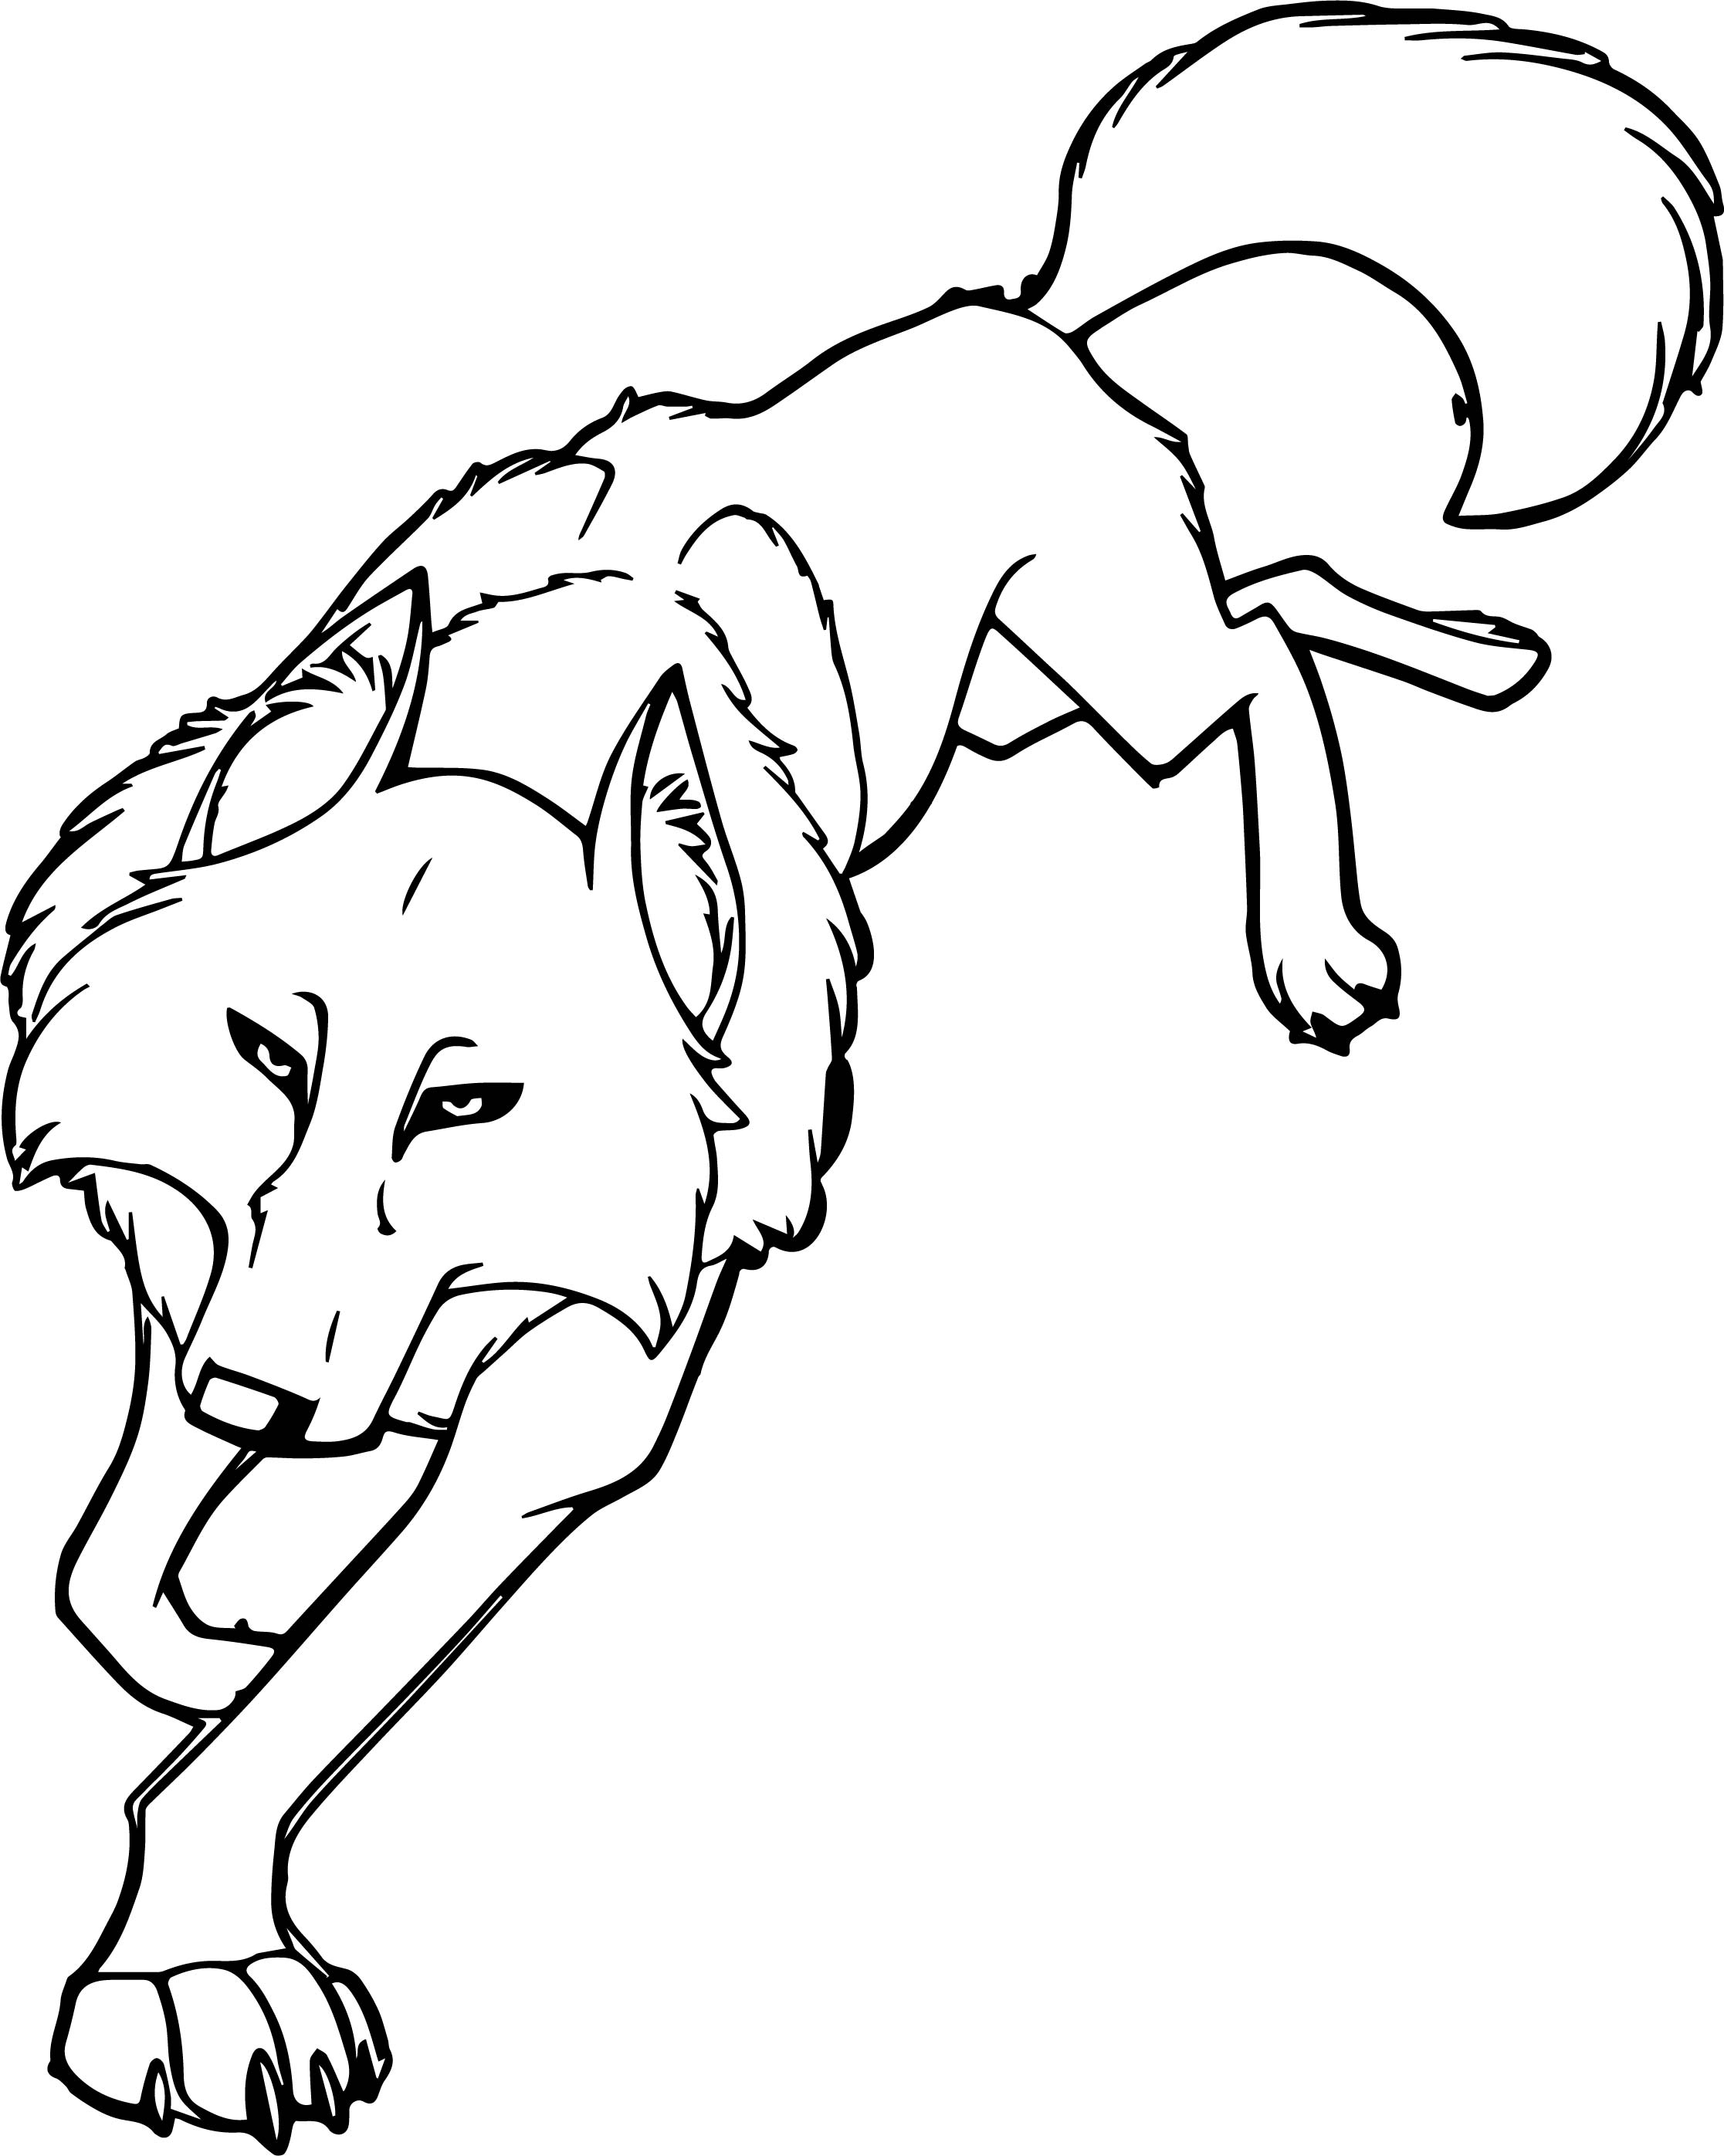 White Wolf From Balto Aniu Coloring Page - Wecoloringpage.com